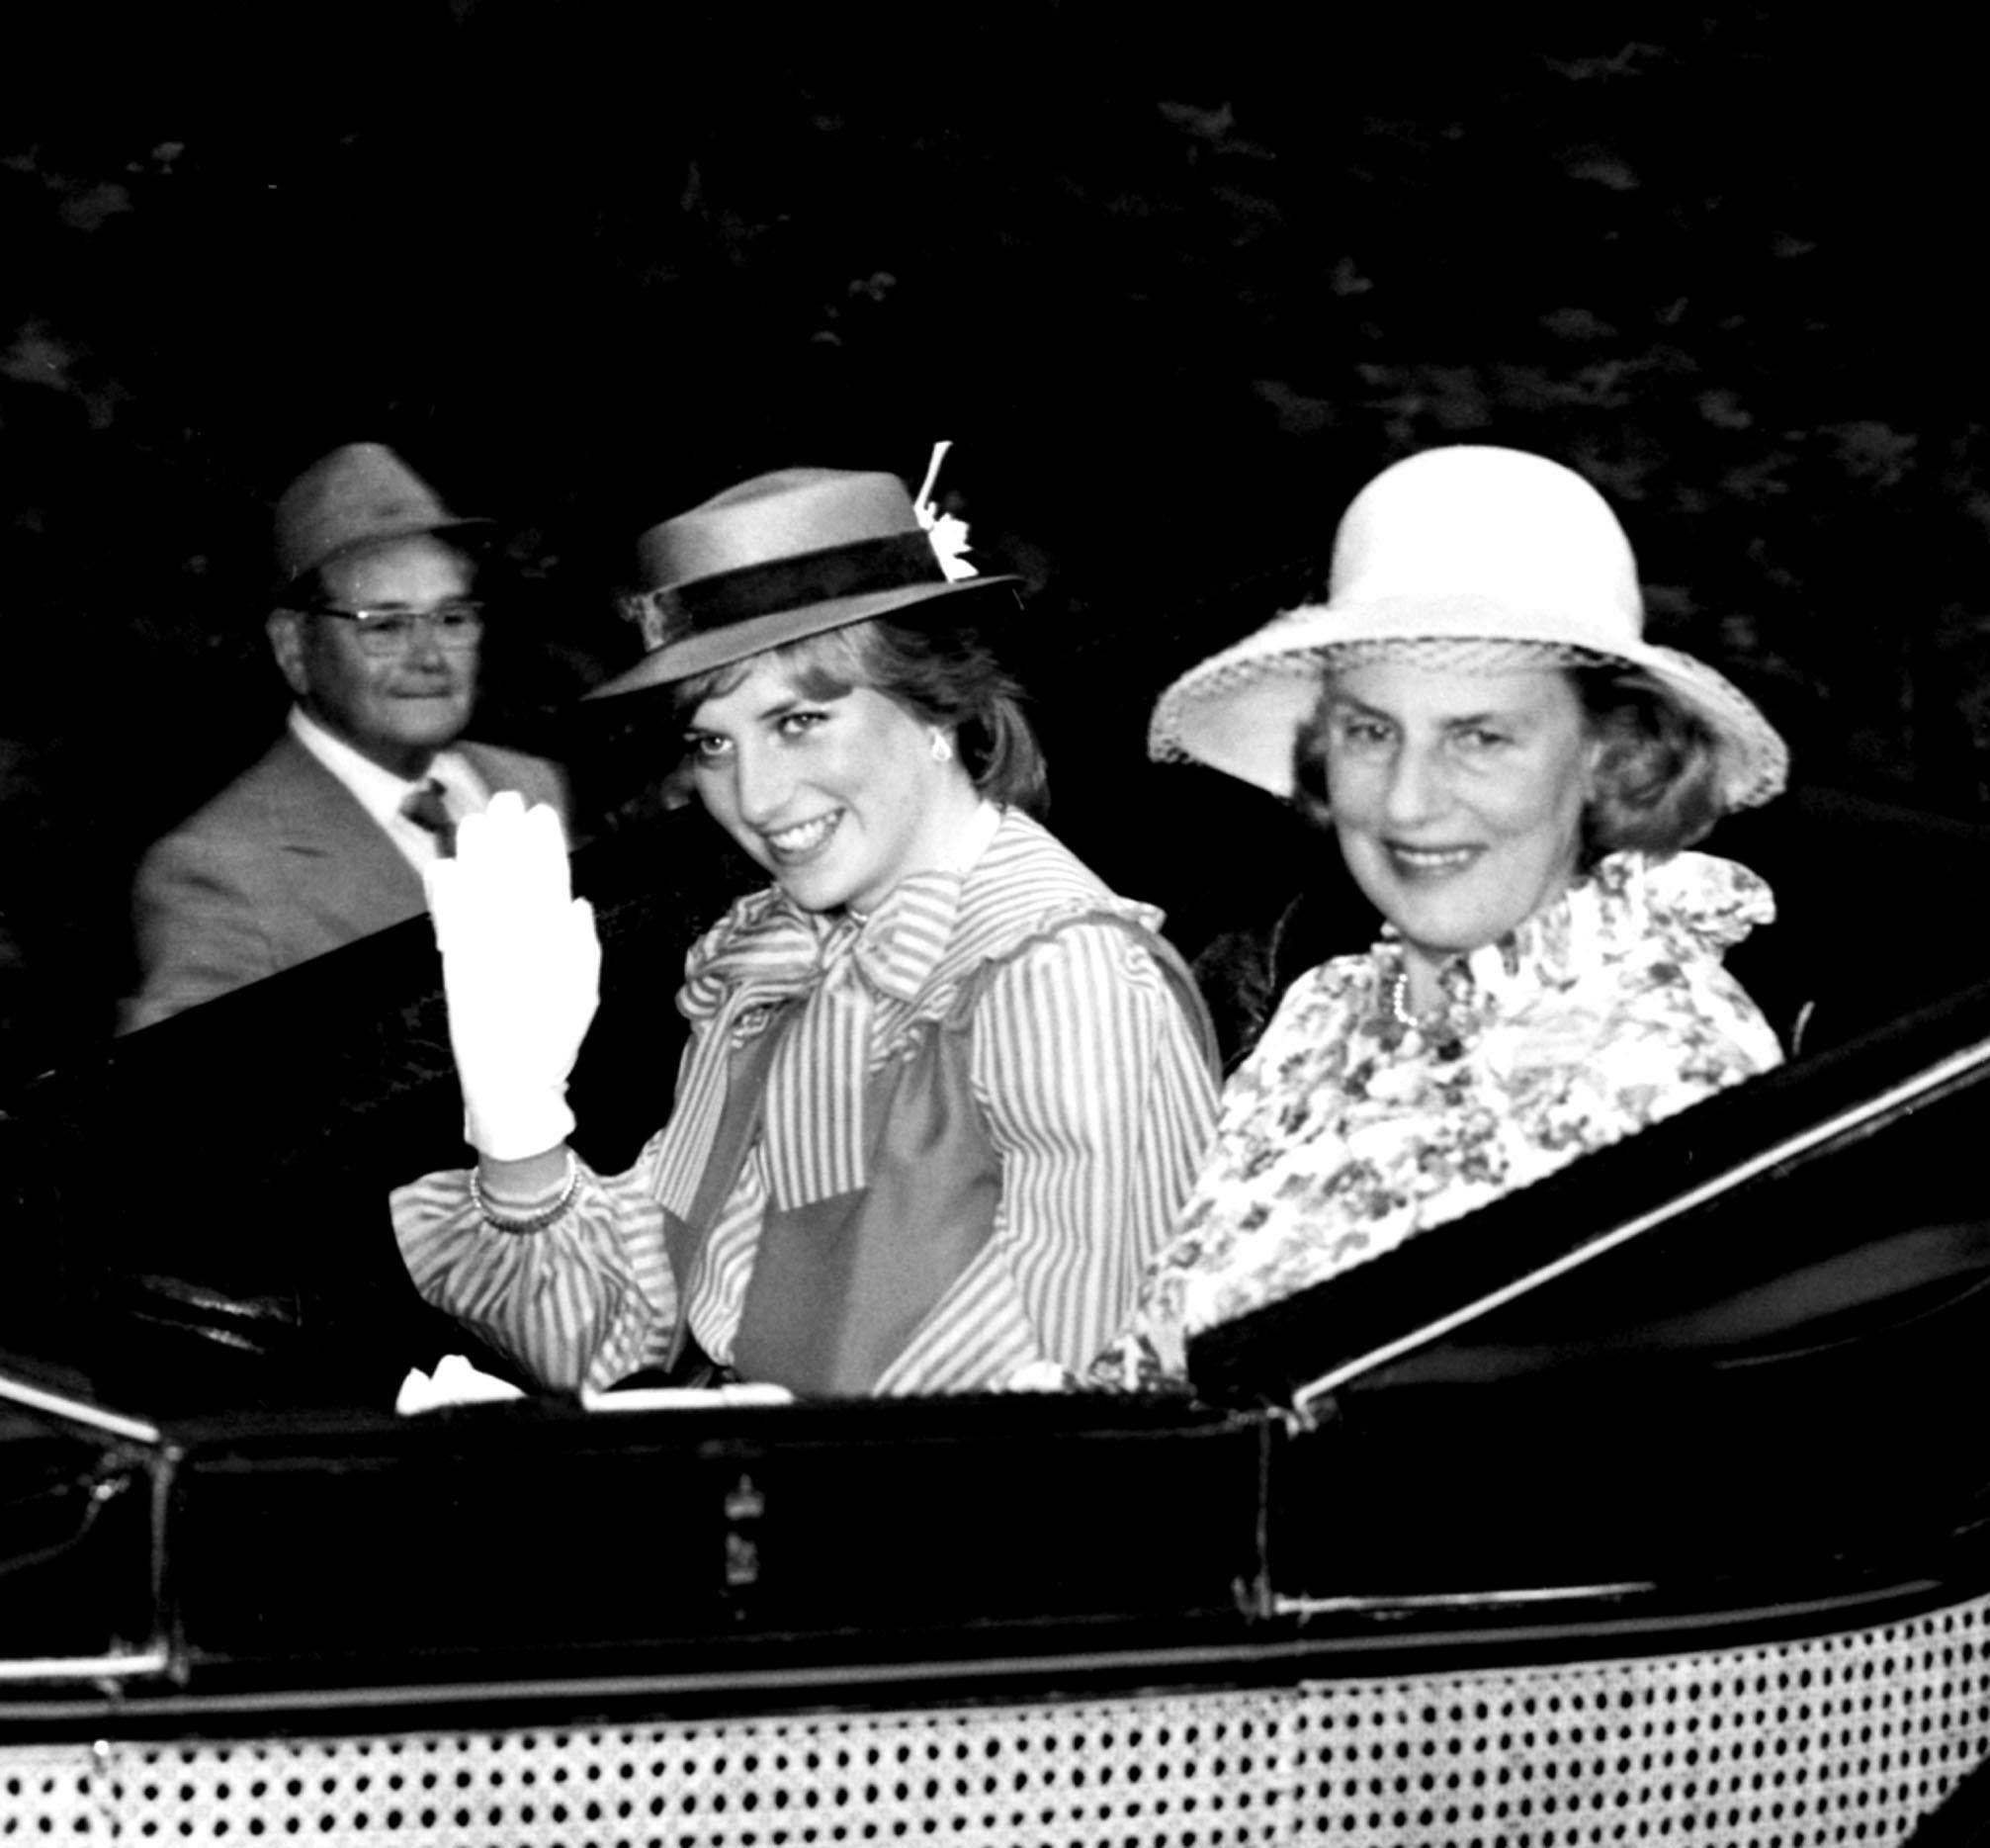 Princess Diana pictured with the Duchess of Grafton at Royal Ascot on Ladies' Day.